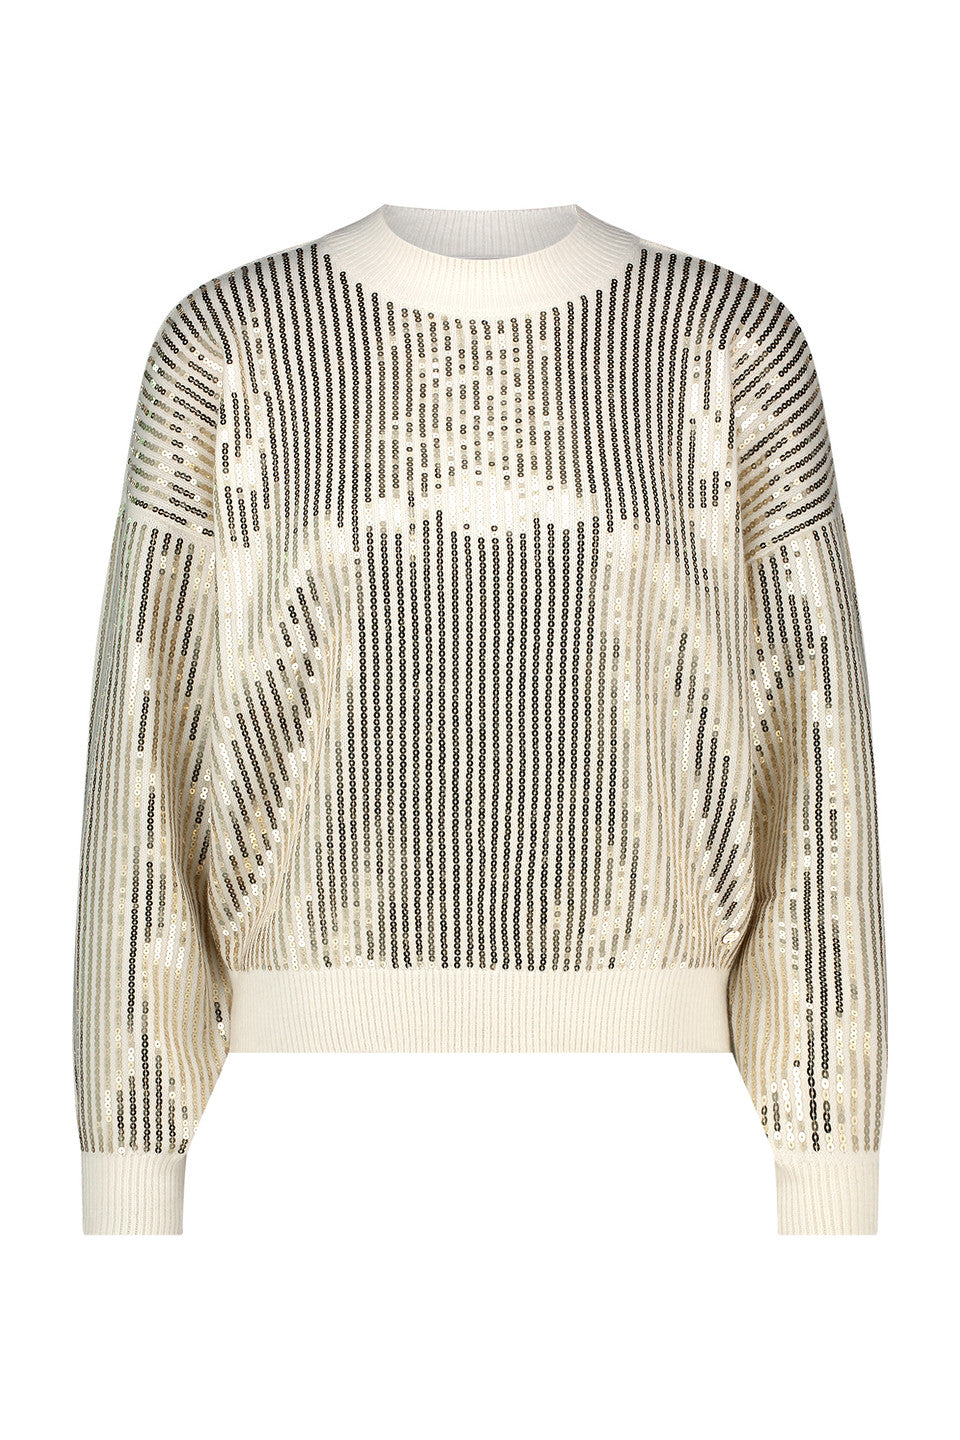 Studio Anneloes Shelby Sequins pullover